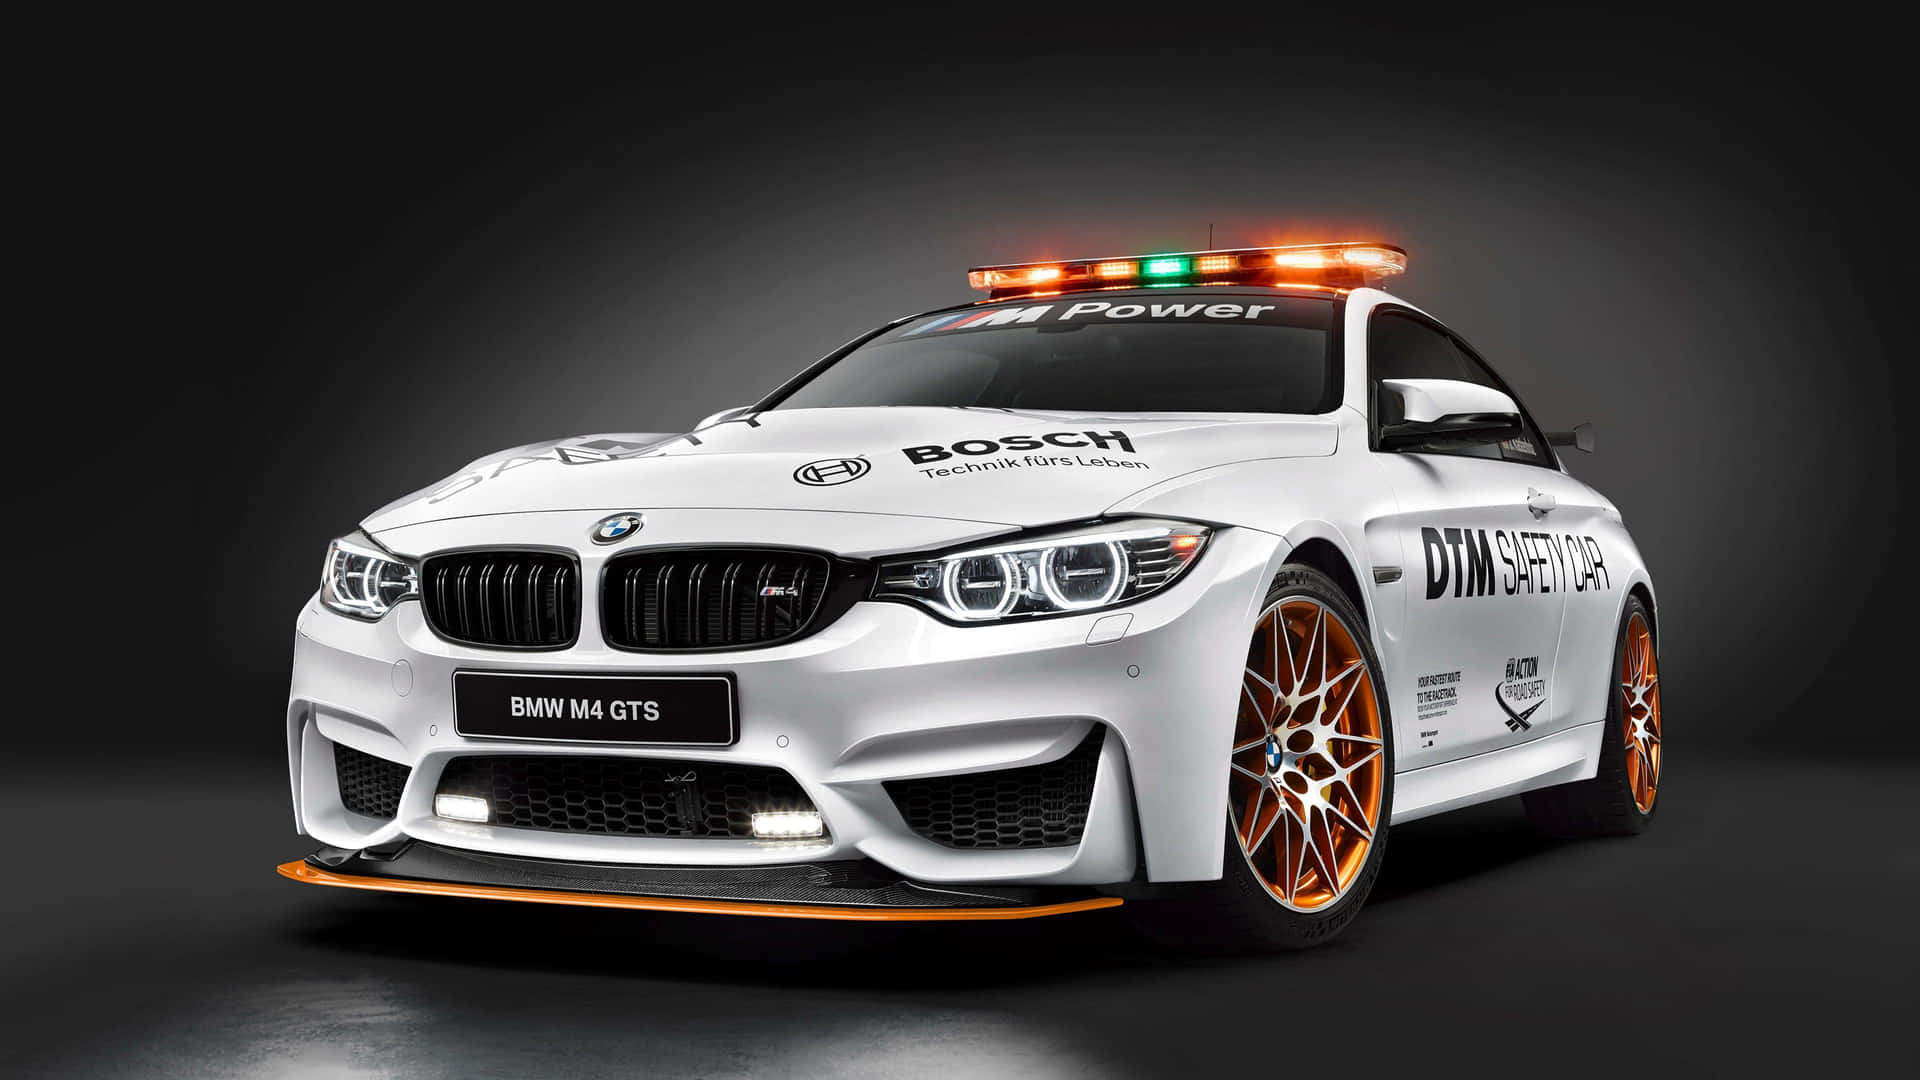 Captivating High-Speed Safety Car in Action Wallpaper